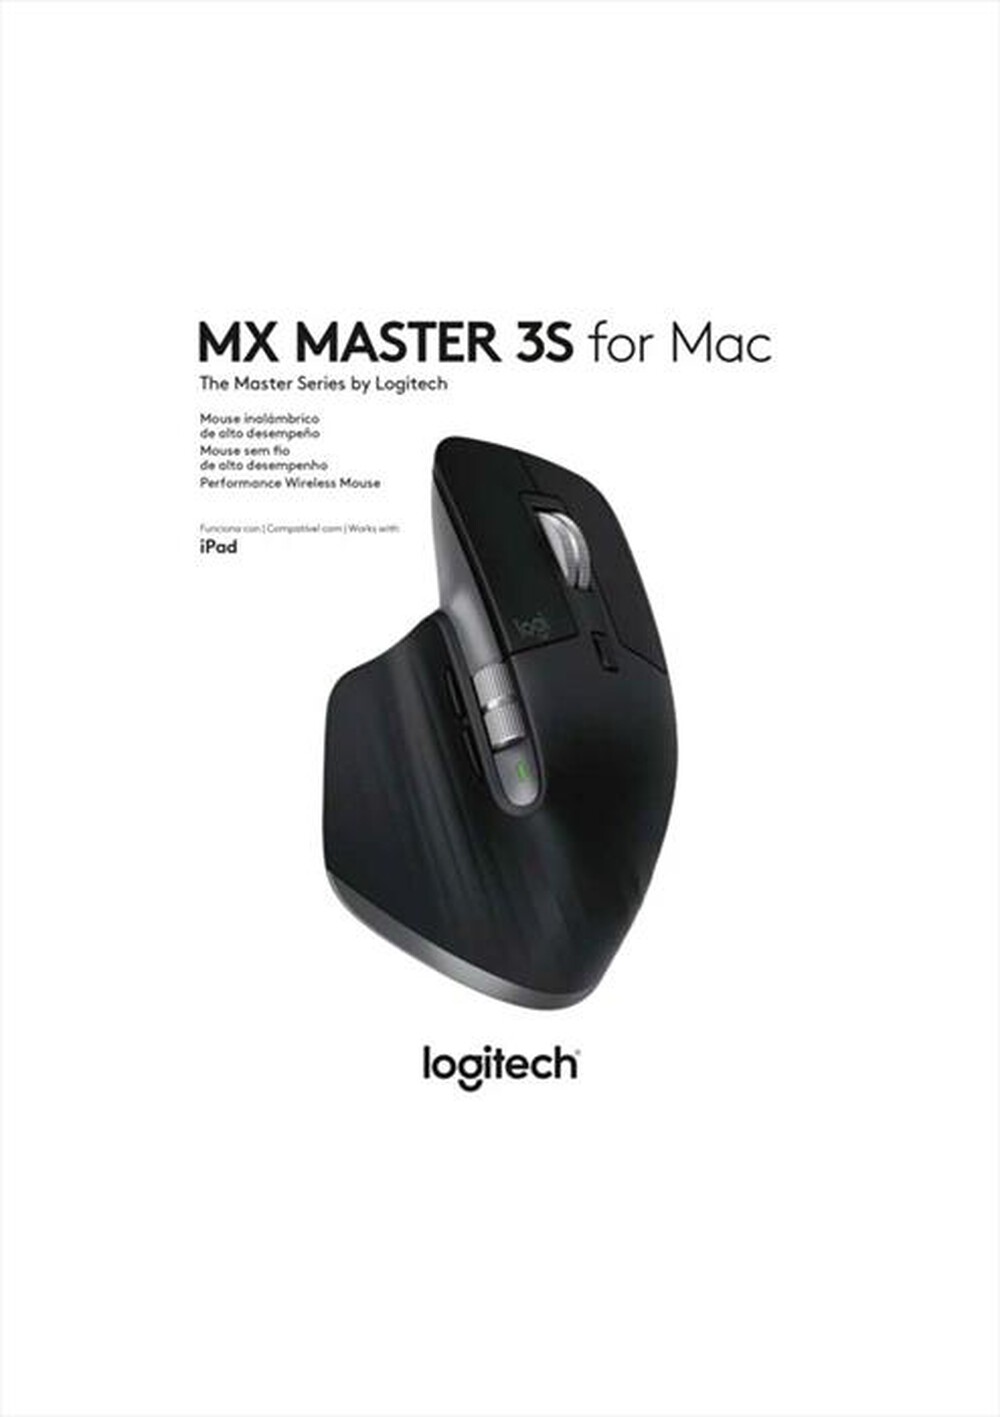 "LOGITECH - Mouse MX Master 3S For Mac-Space Grey"